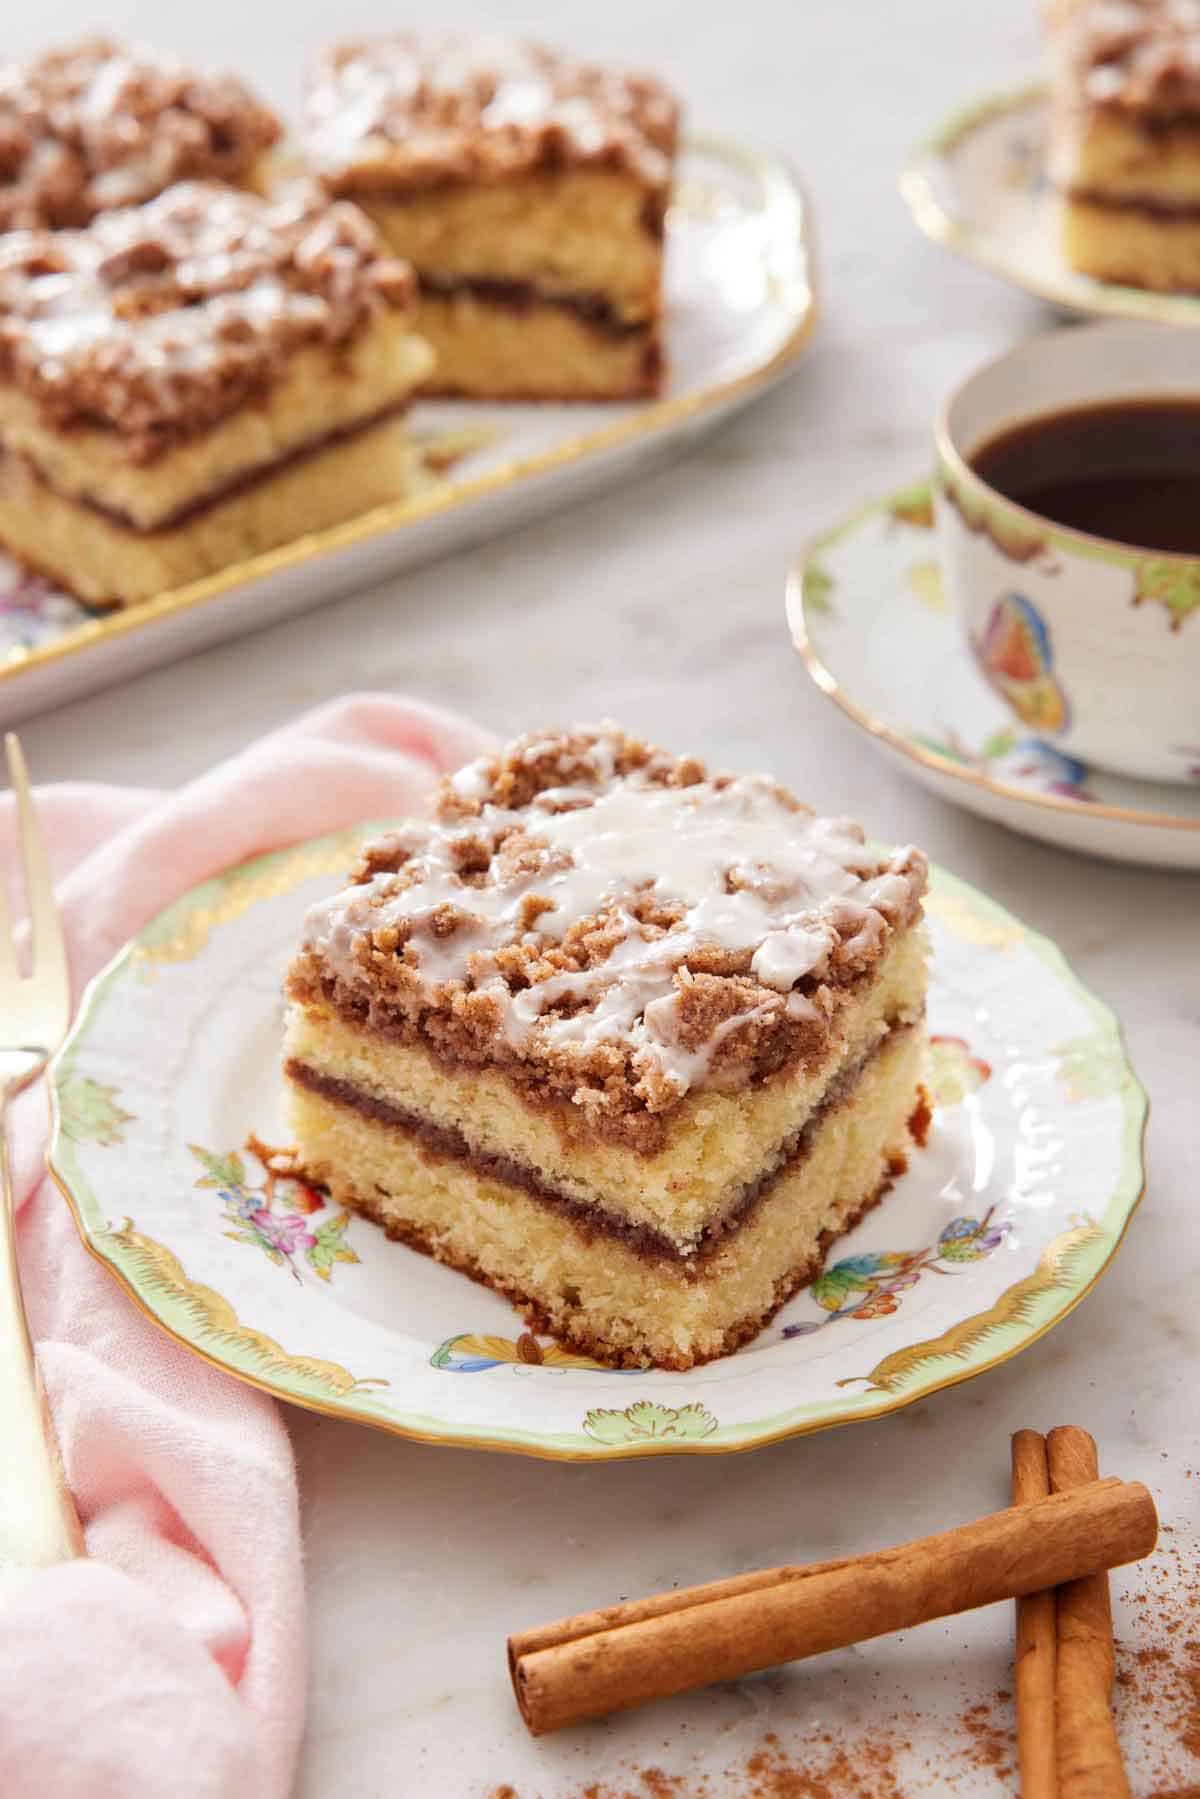 A plate with a slice of coffee cake with some cinnamon sticks in front and cup of coffee with more cake in the background.